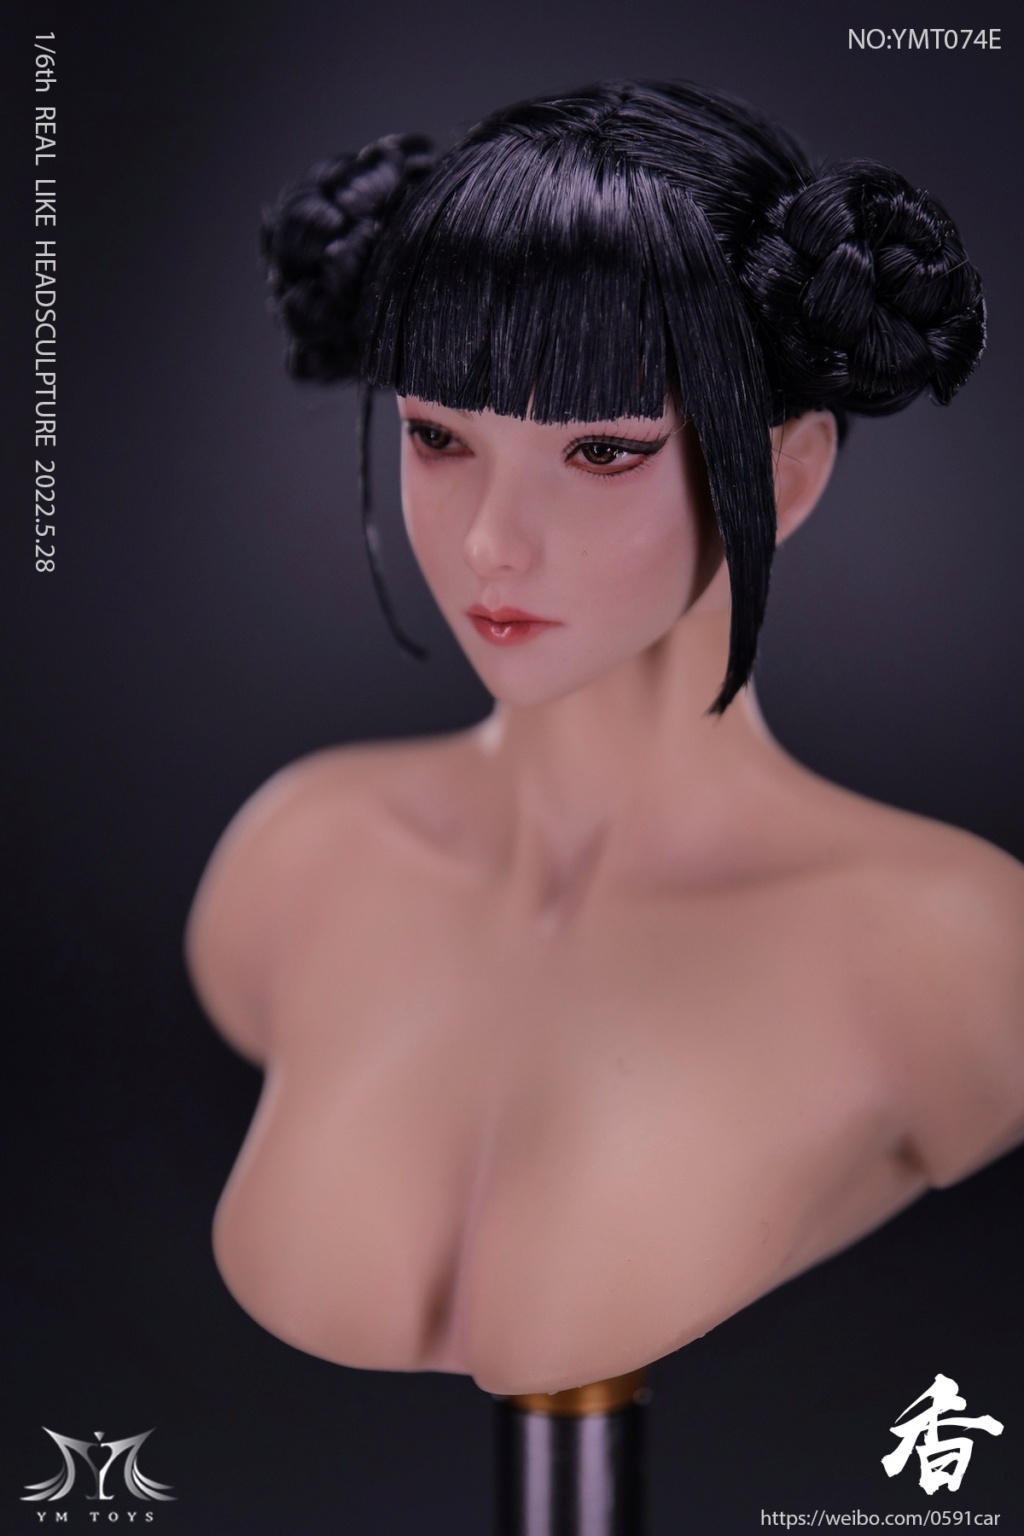 NEW PRODUCT: YMTOYS: 1/6 YMT074 Cool Female Head Sculpt 14502910